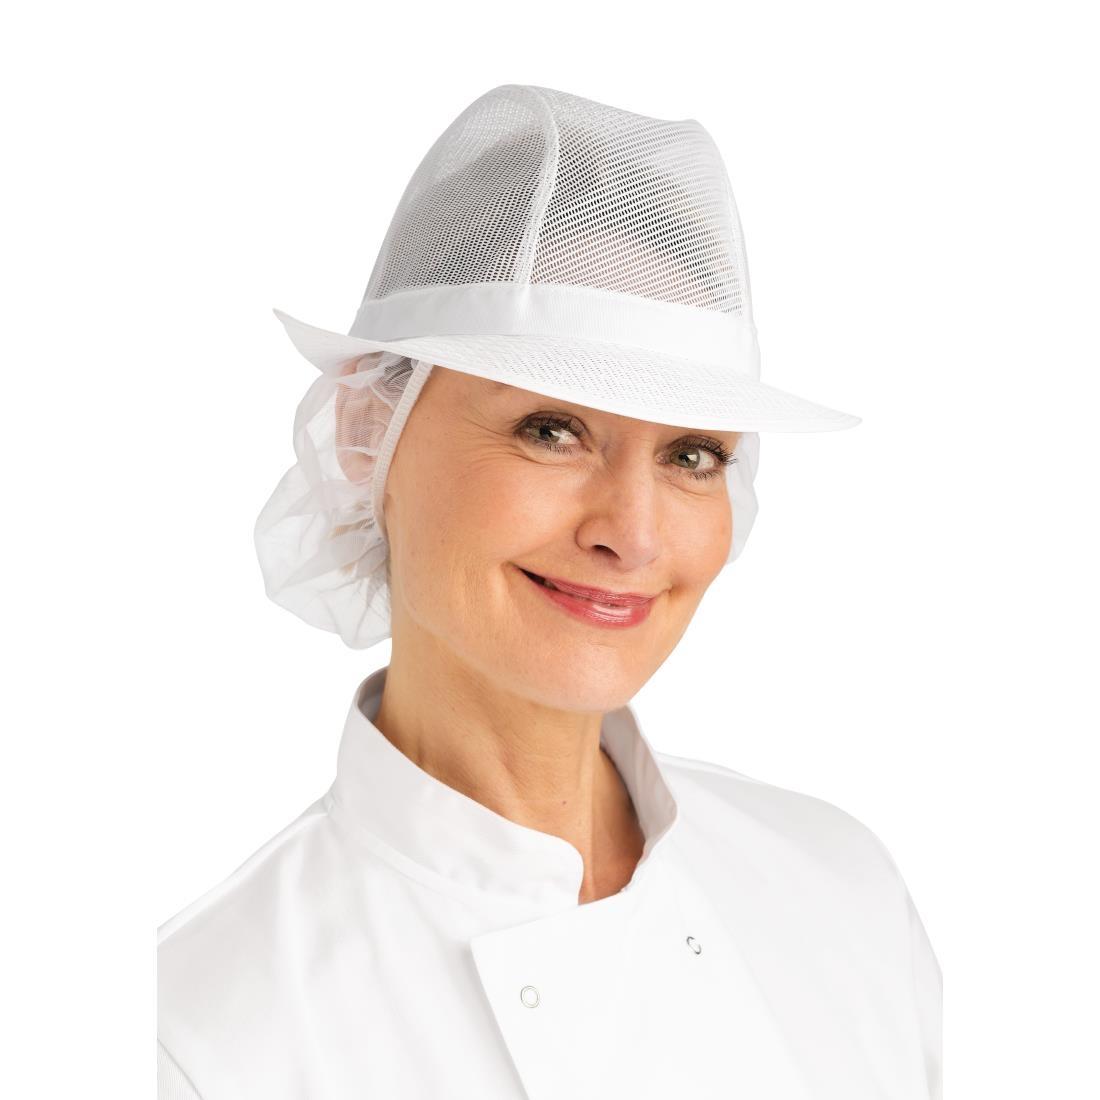 Trilby Hat with Net Snood White L - A653-L  - 1